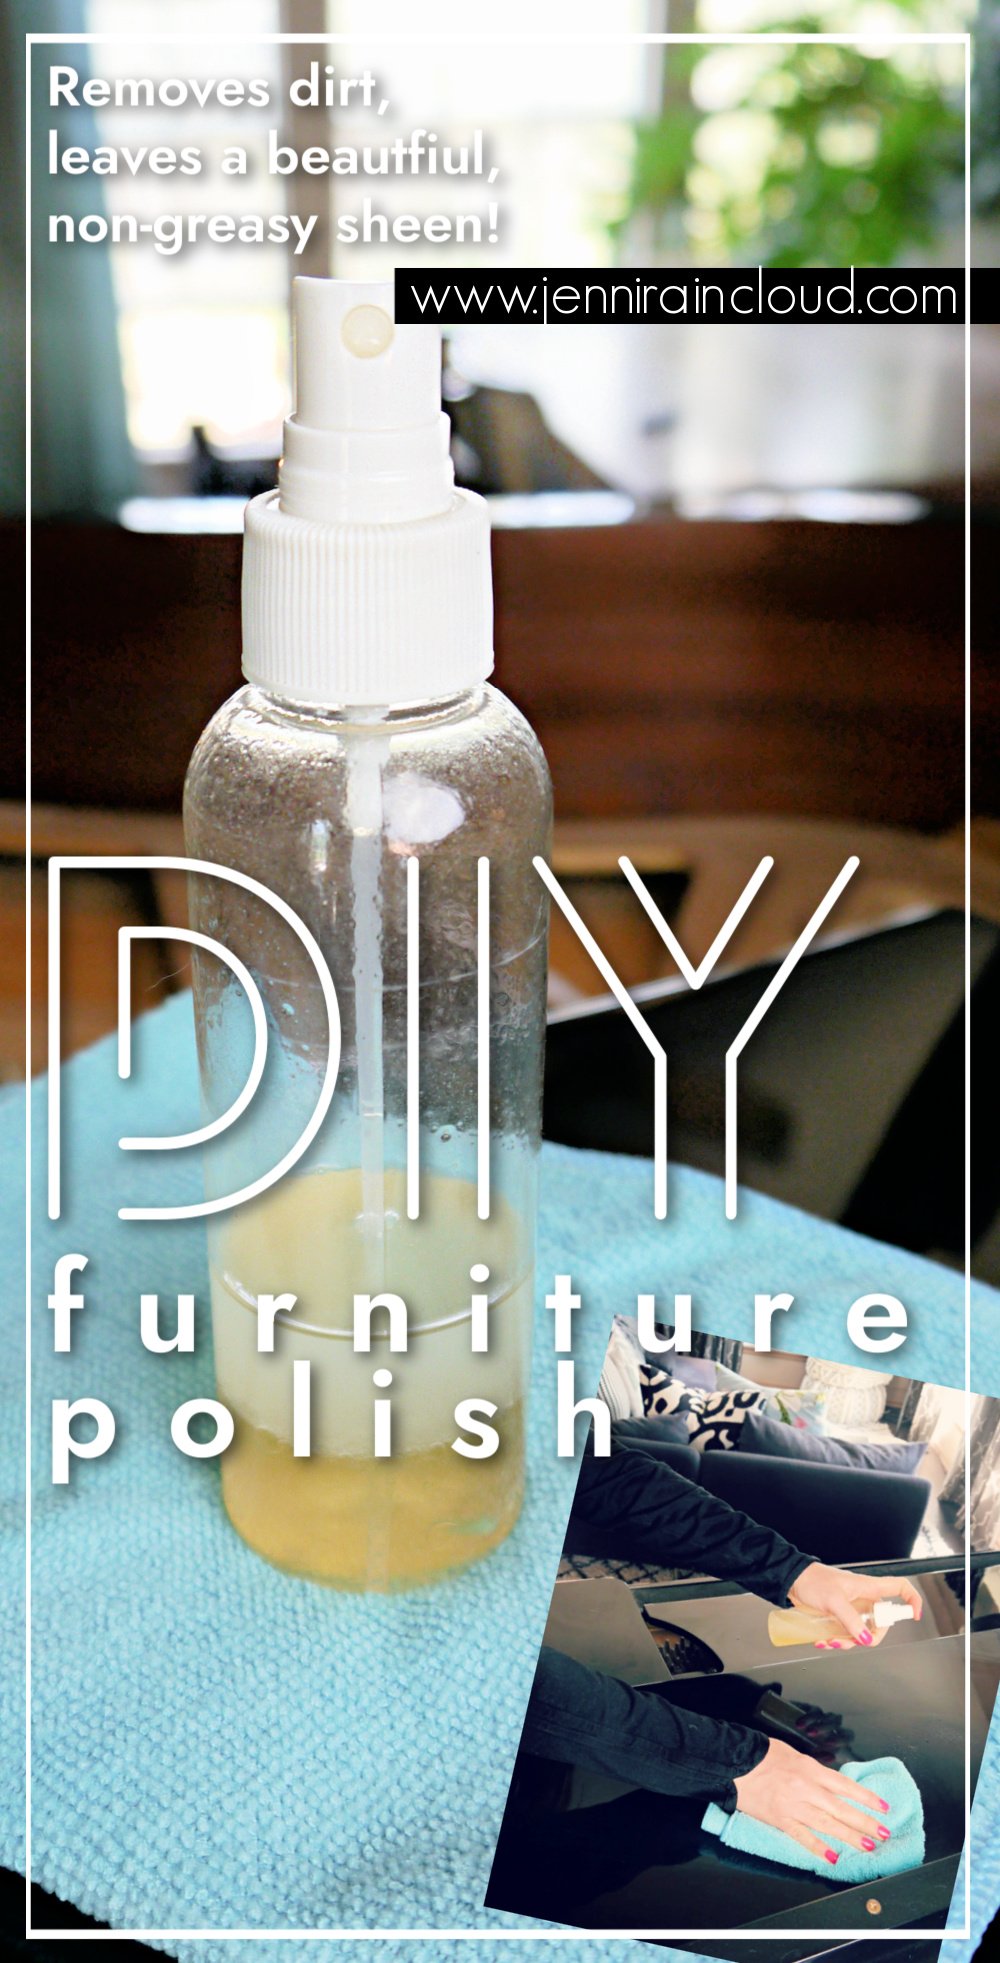 Clear spray bottle with homemade furniture polish on a teal microfiber cloth. 